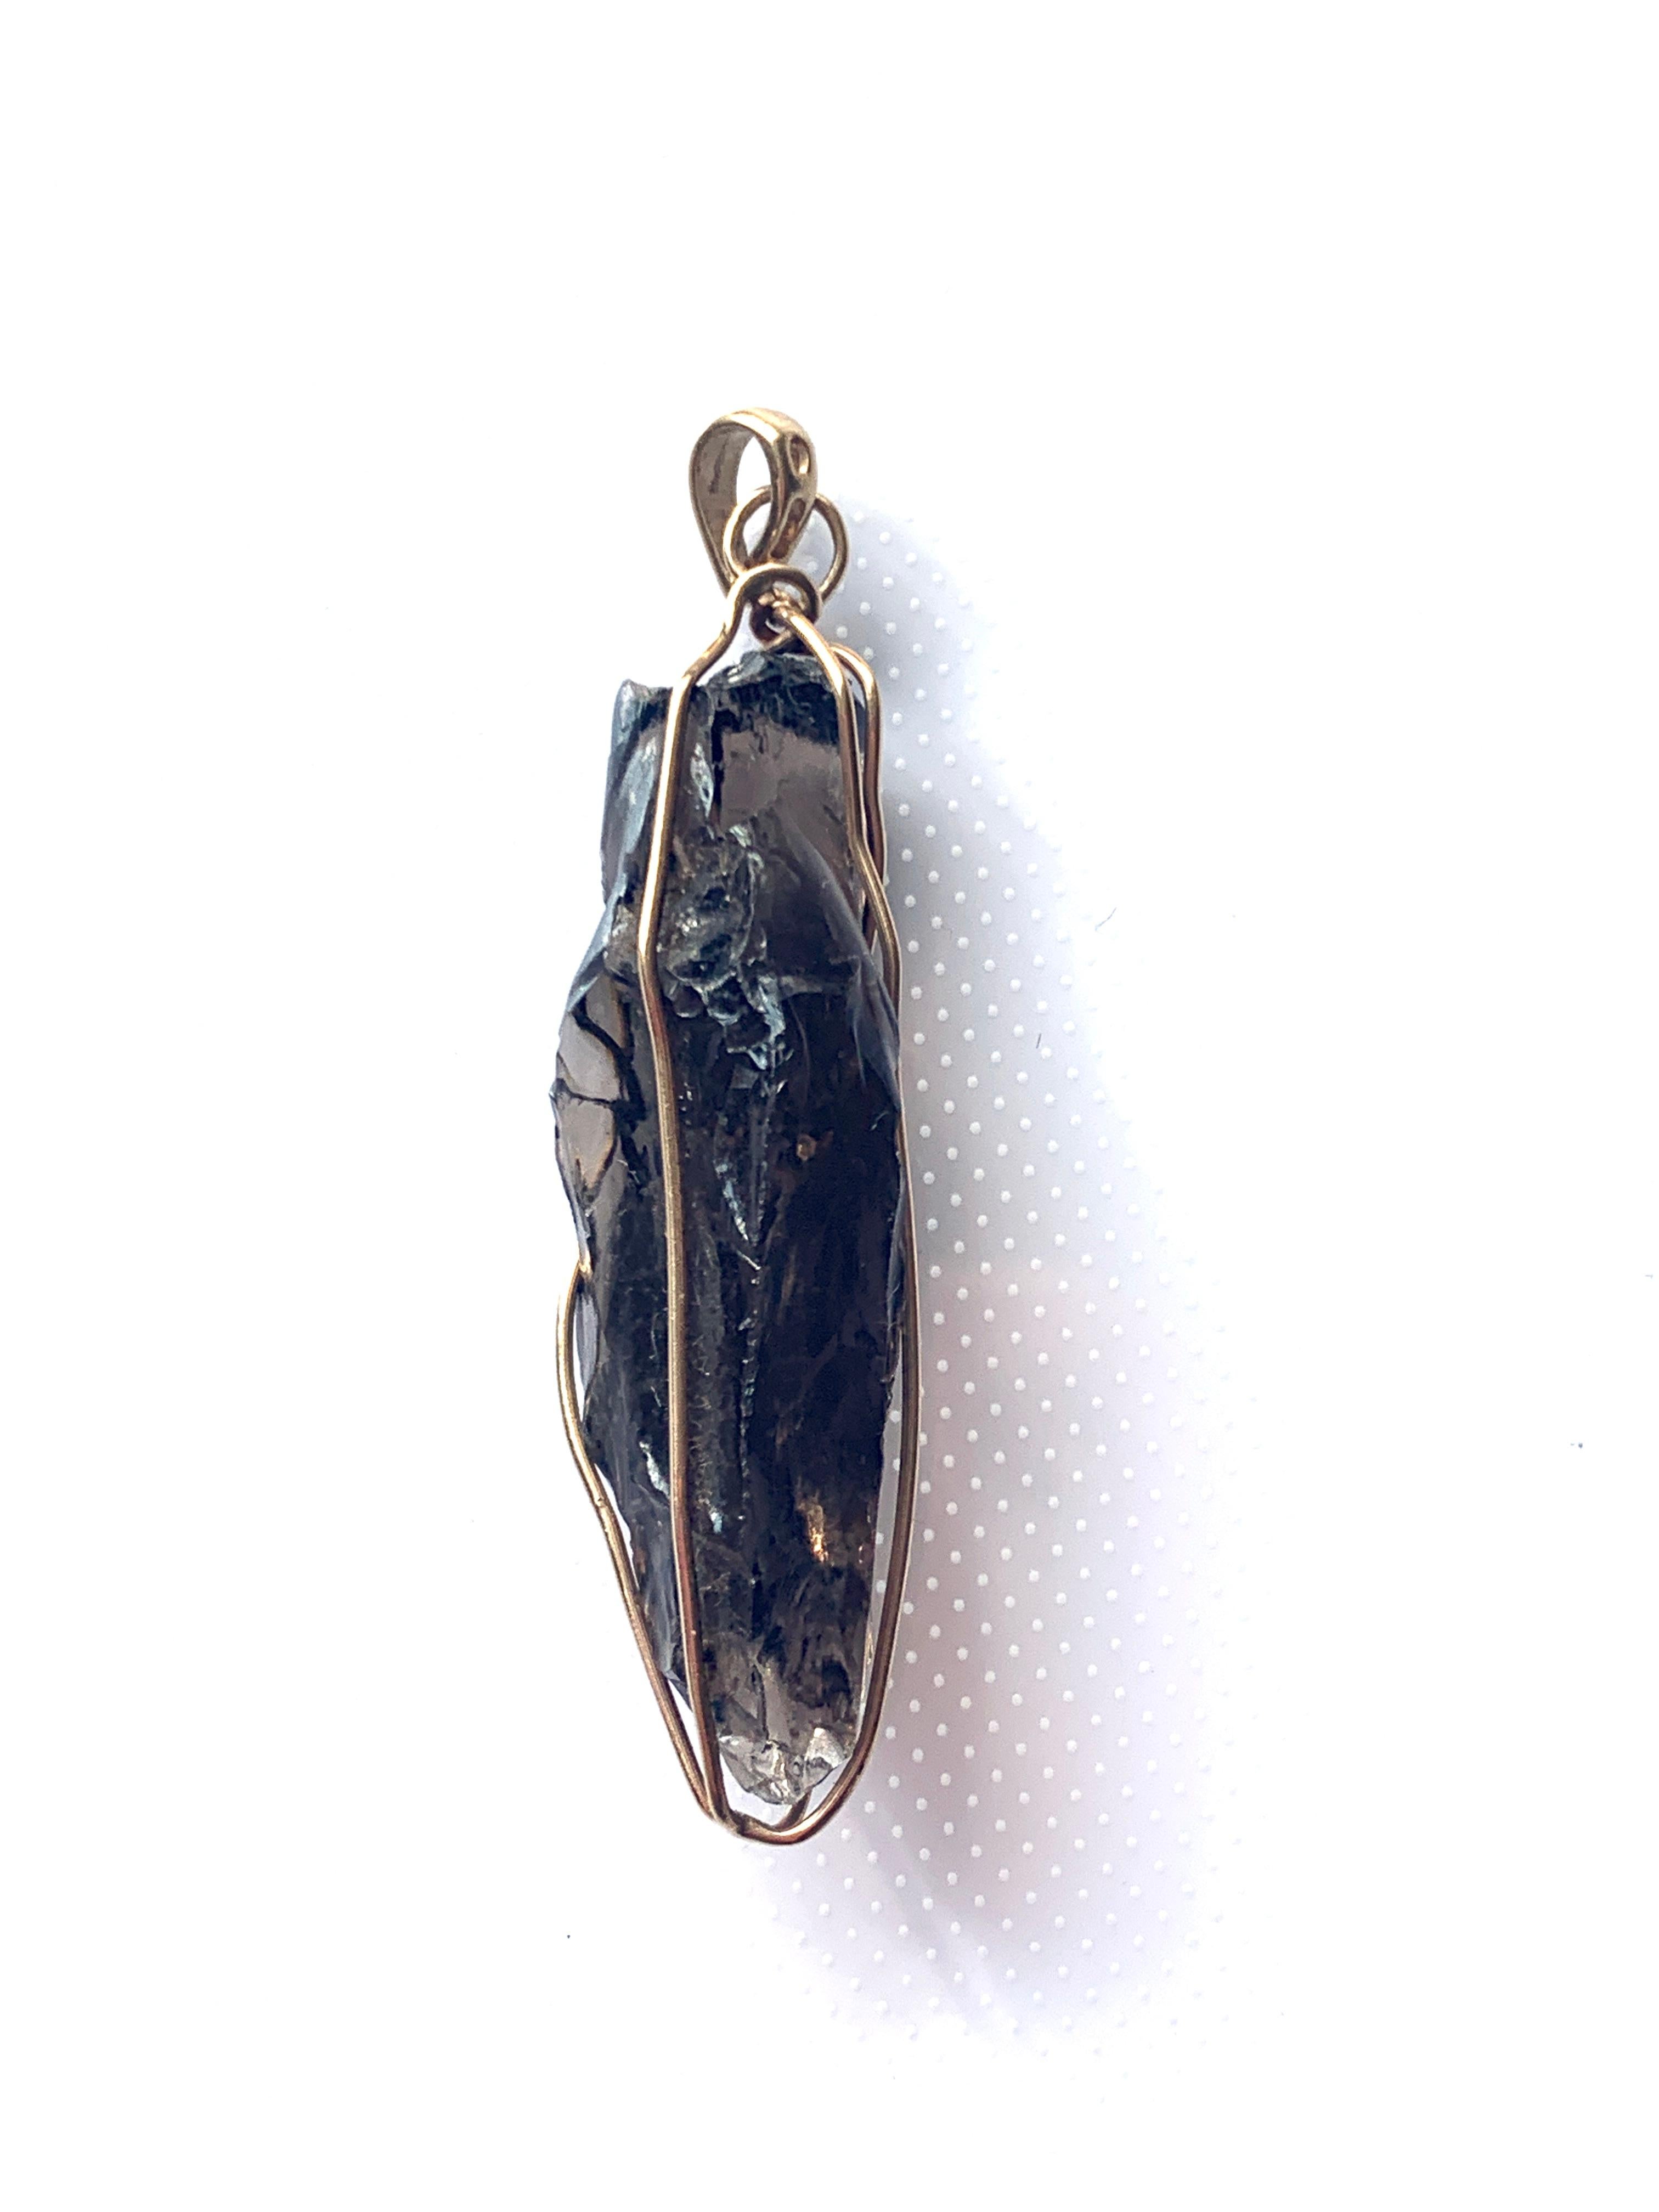 9ct 375 Gold Encaged smokey Quartz Pendant
Fully Hallmarked Makers THL
Bail has threading space of 3.5mm 
Pendant Measures 5cm x 1.5cm (at its widest point)approx
      Total Weight  8.34 grammes 
Estimated gold weight present 1.7 grammes